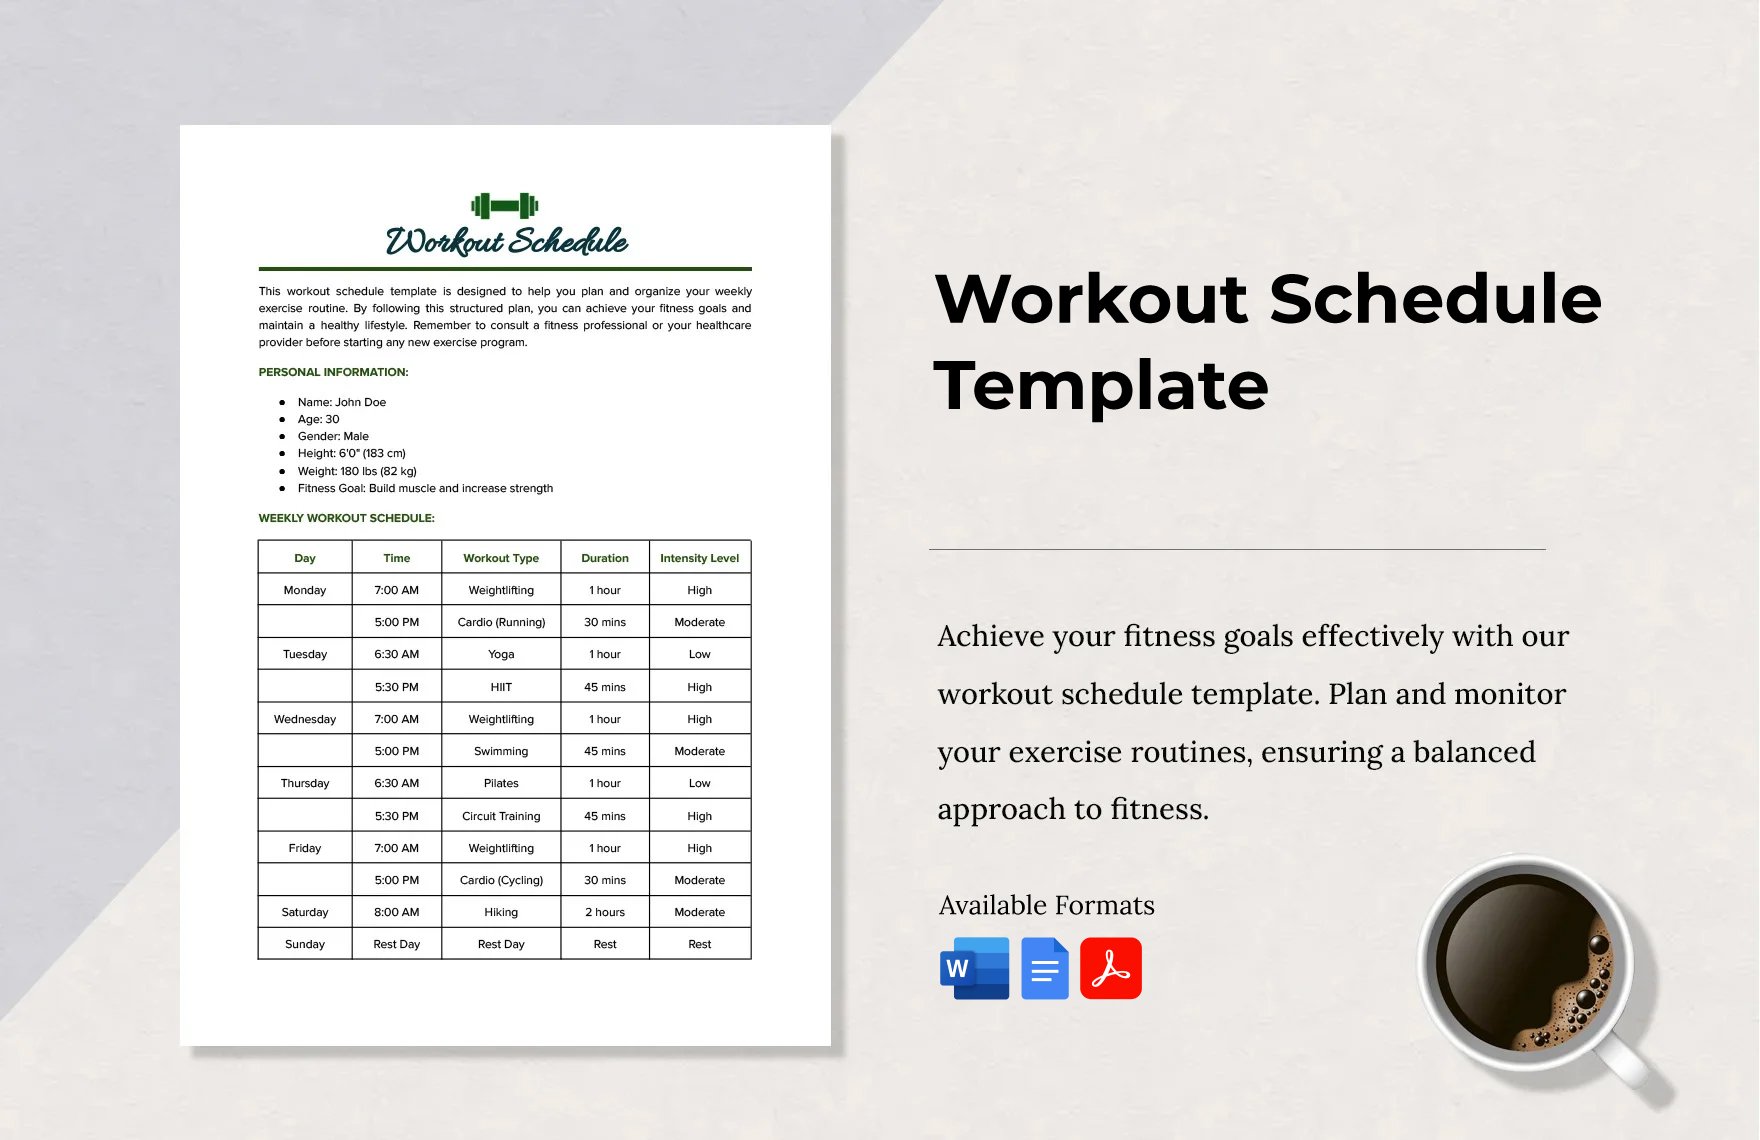 Download Get Fit with this Fun and Cute Workout Routine Wallpaper